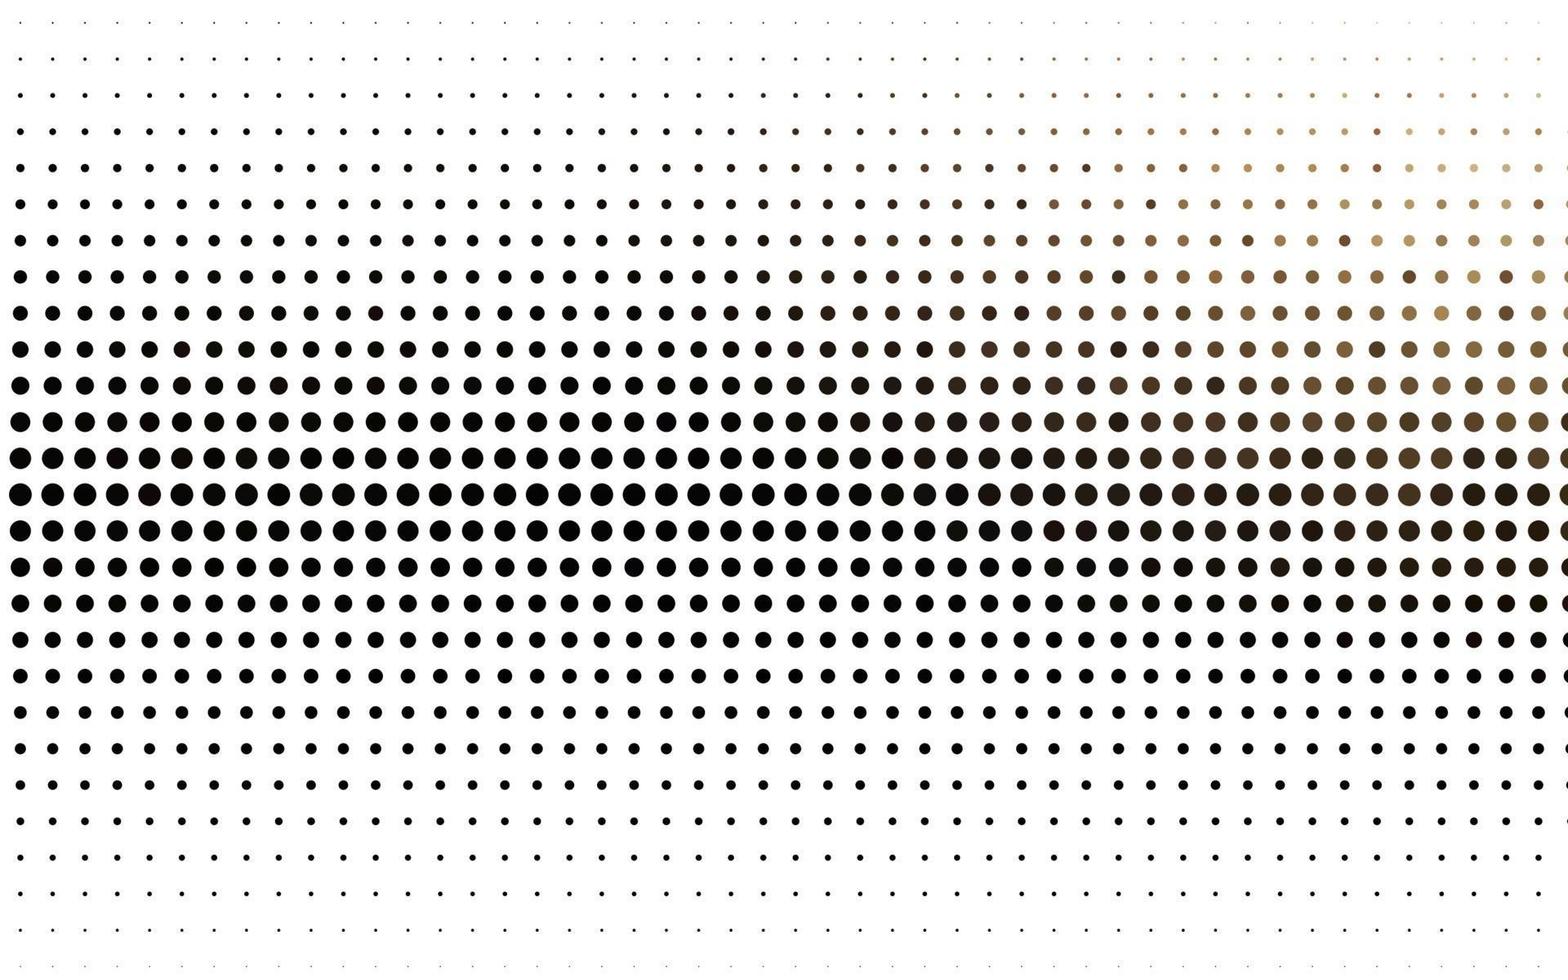 Light Black vector pattern with spheres.